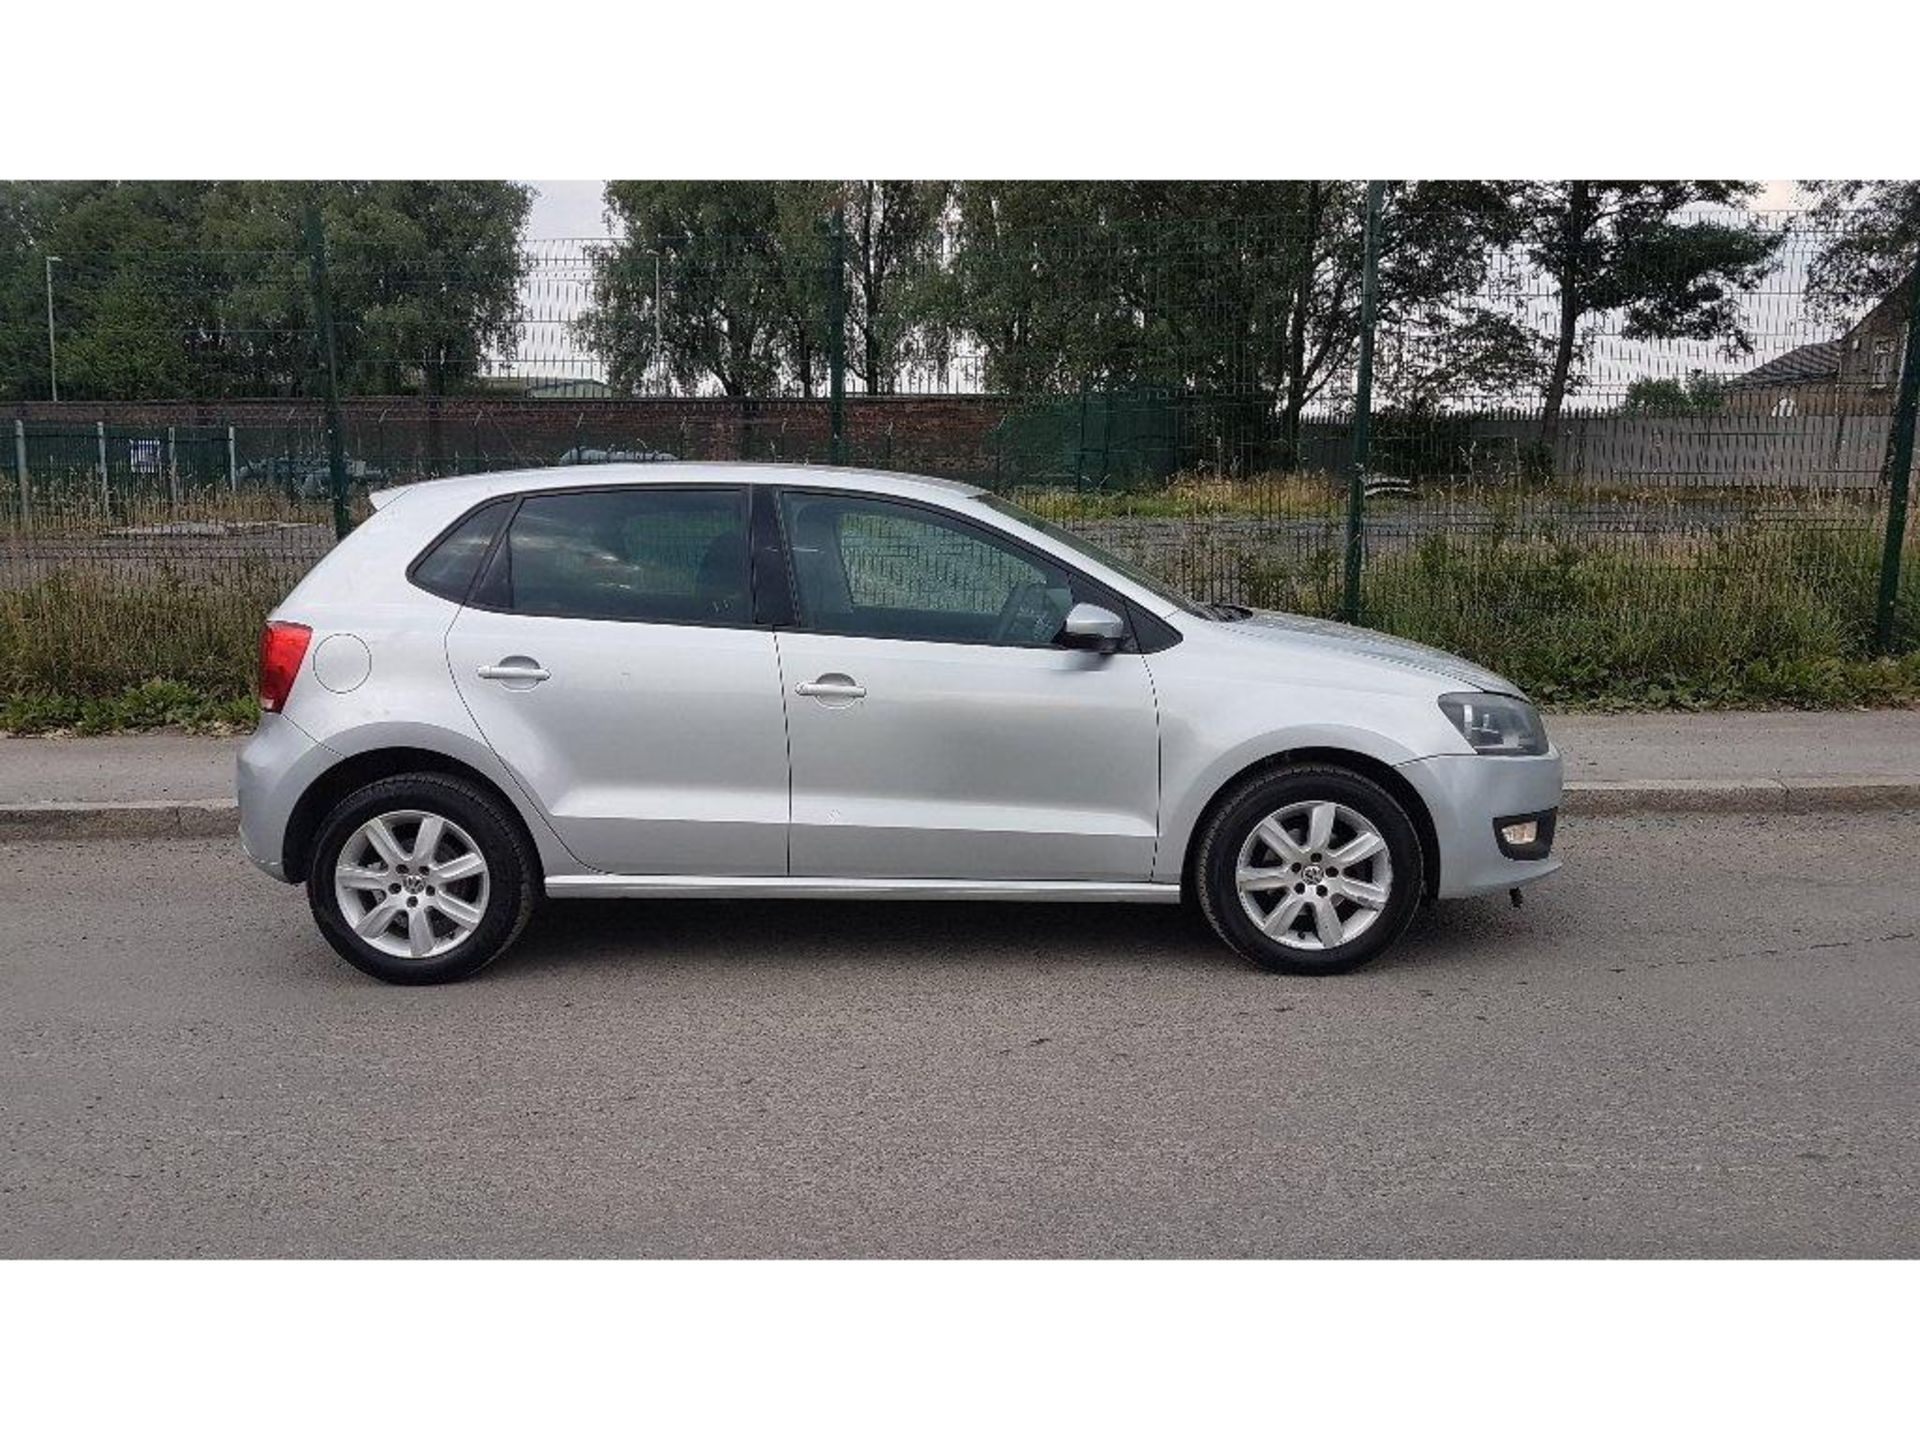 VOLKSWAGEN POLO 1.2 MATCH EDITION 5DR, FT13 HHY, 20.05.2013, PETROL, MILEAGE 28,499, MANUAL, 1.2L, 2 - Image 15 of 19